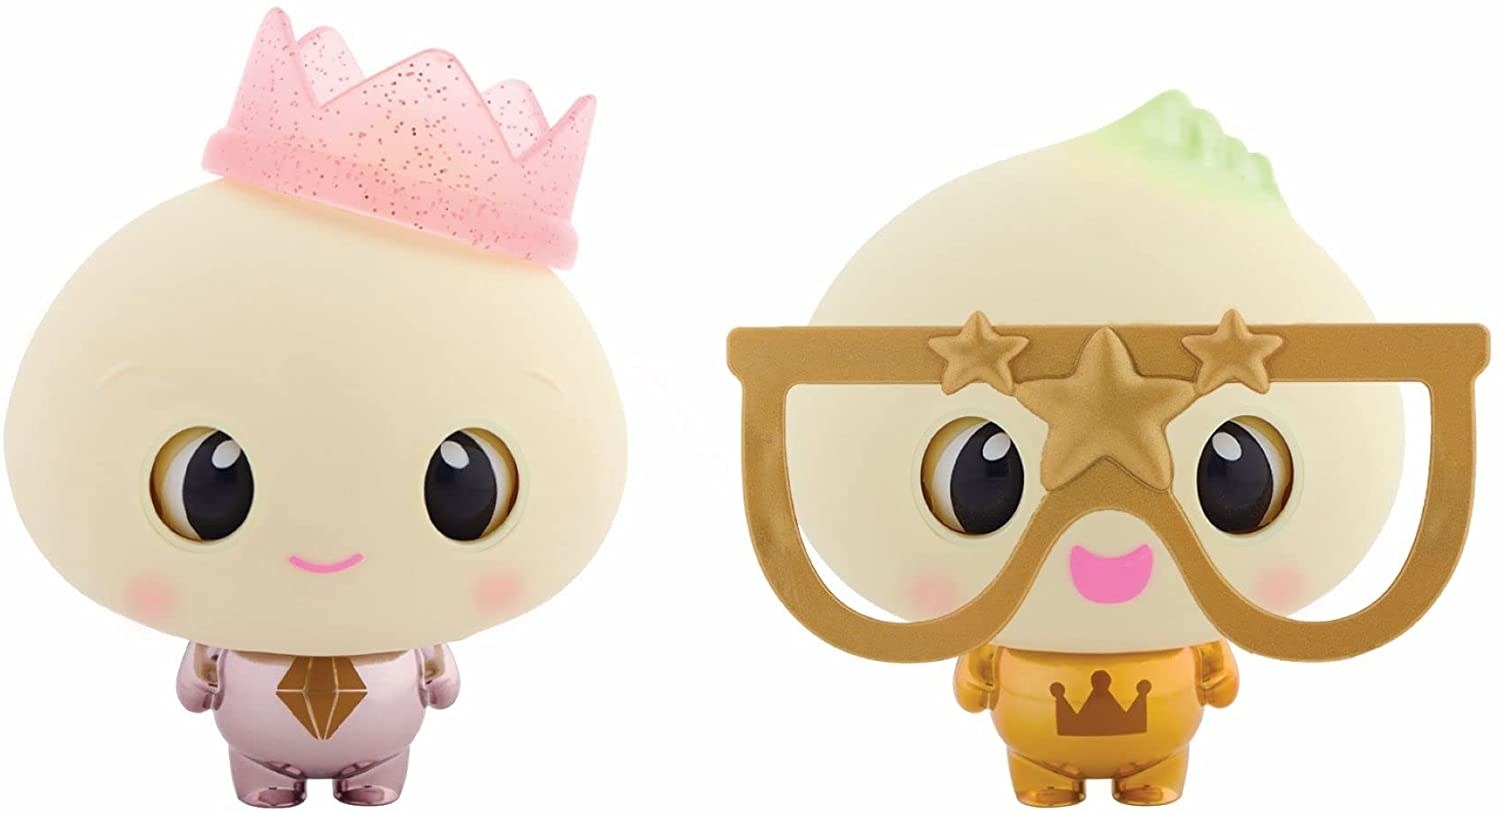 the interactive dumplings one wearing a crown and the other wearing glasses